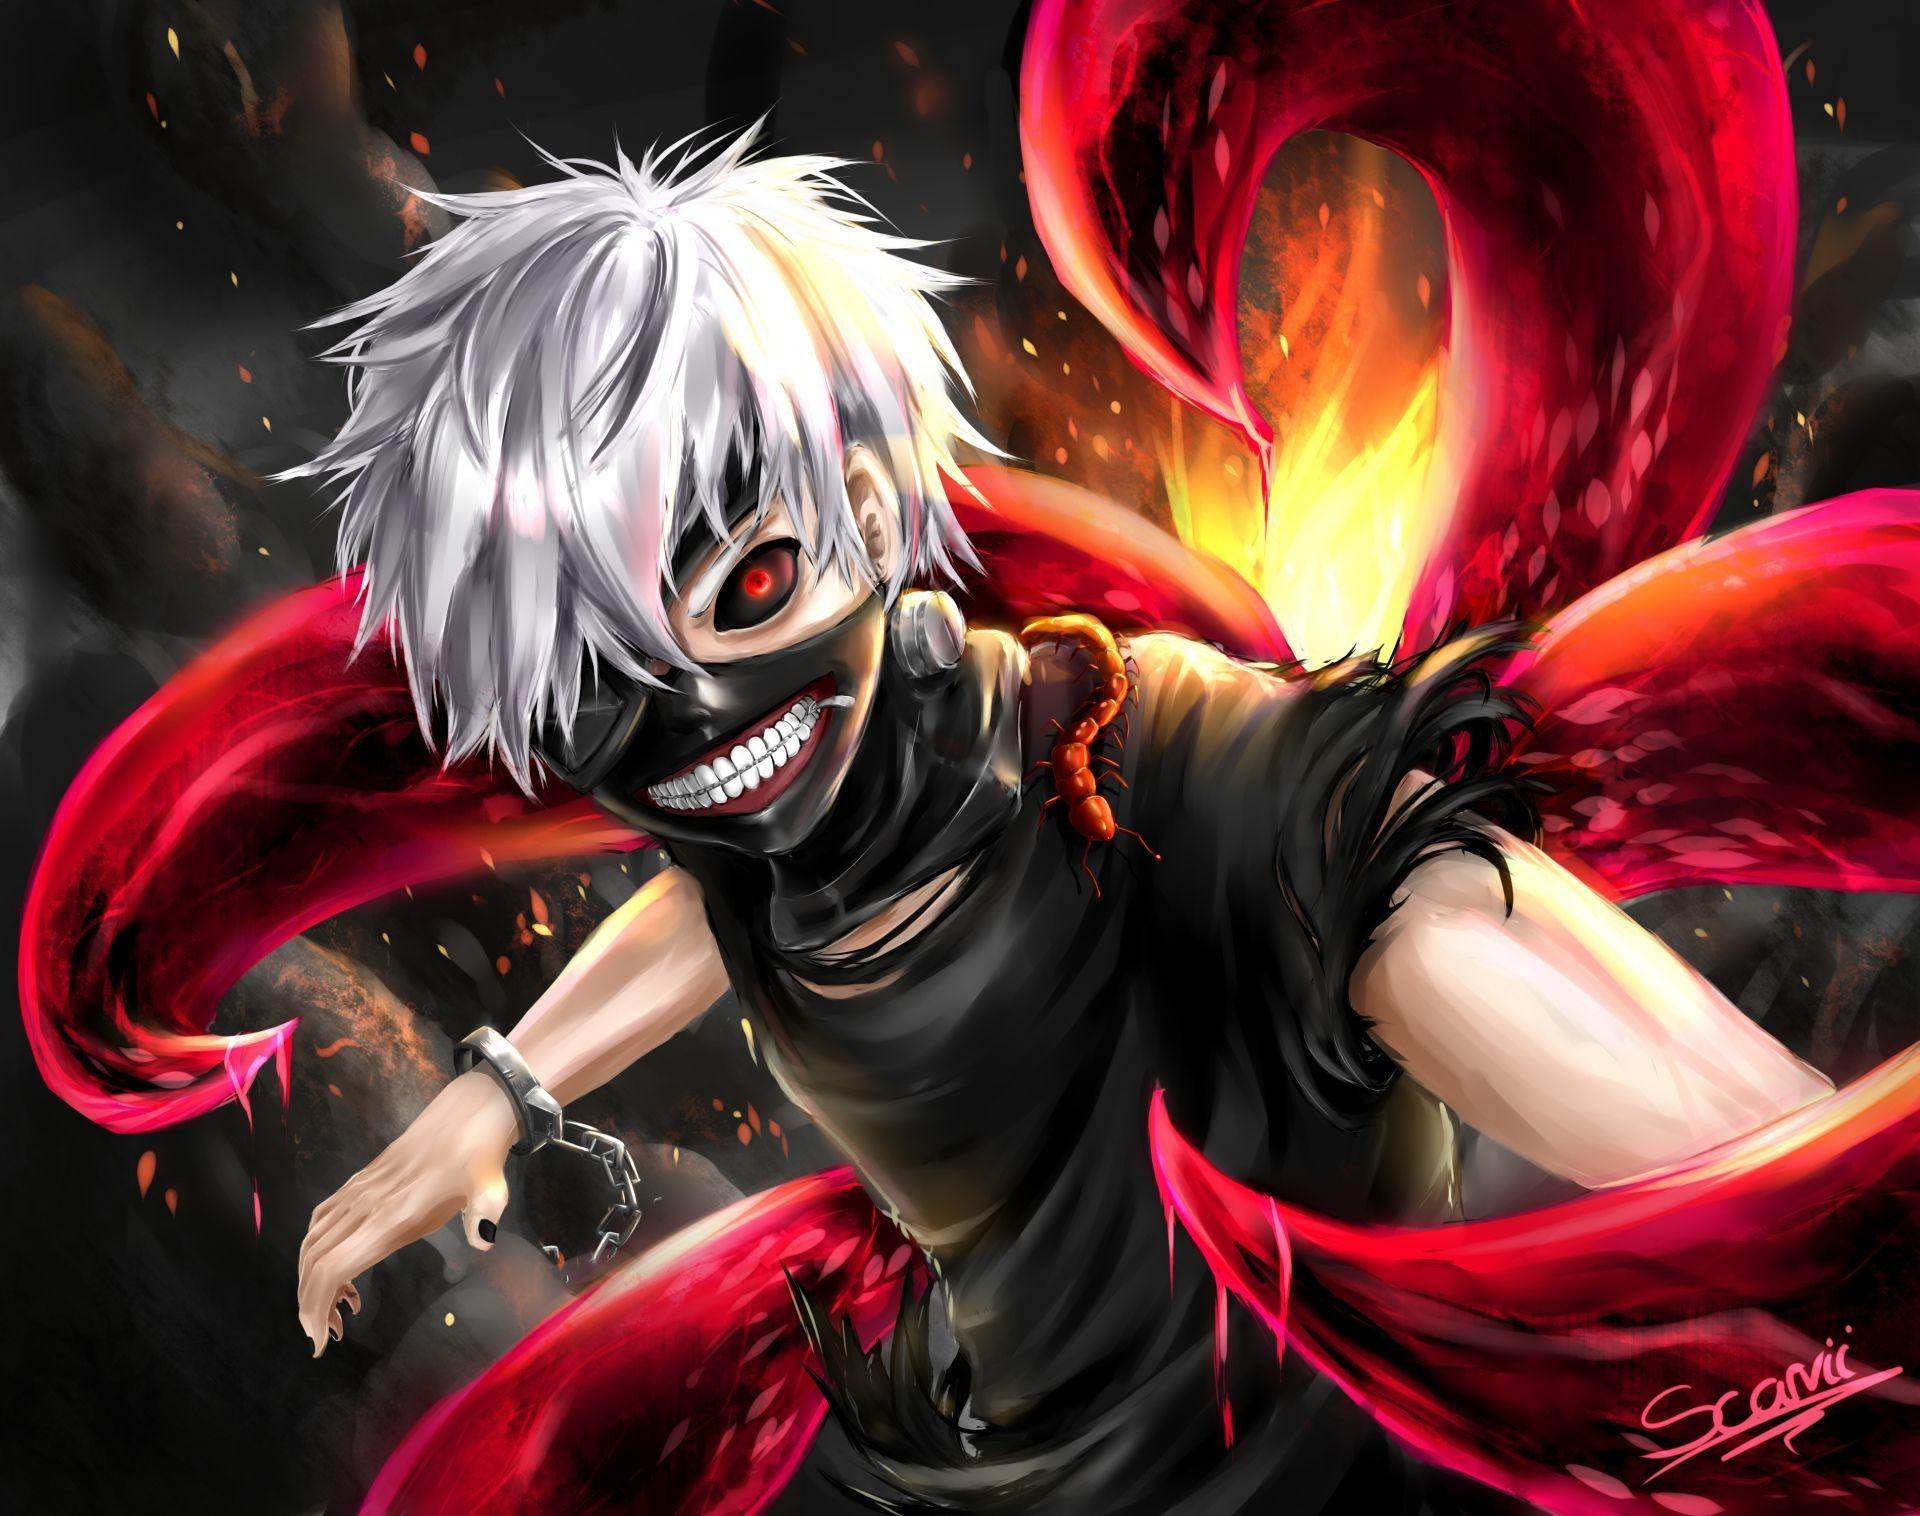 Anime Badass Tokyo Ghoul Wallpapers Wallpaper Cave